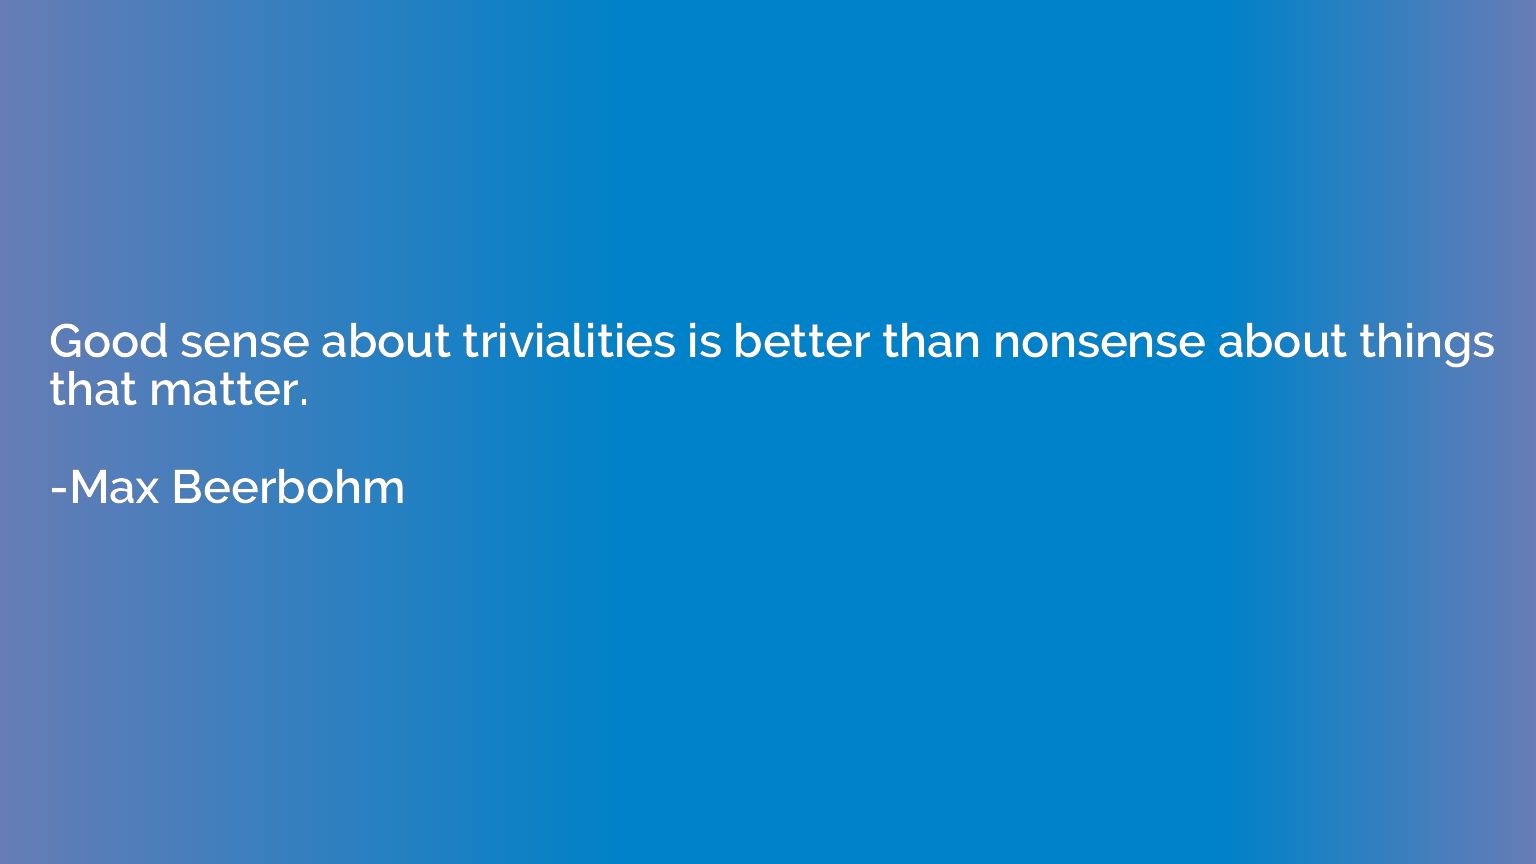 Good sense about trivialities is better than nonsense about 